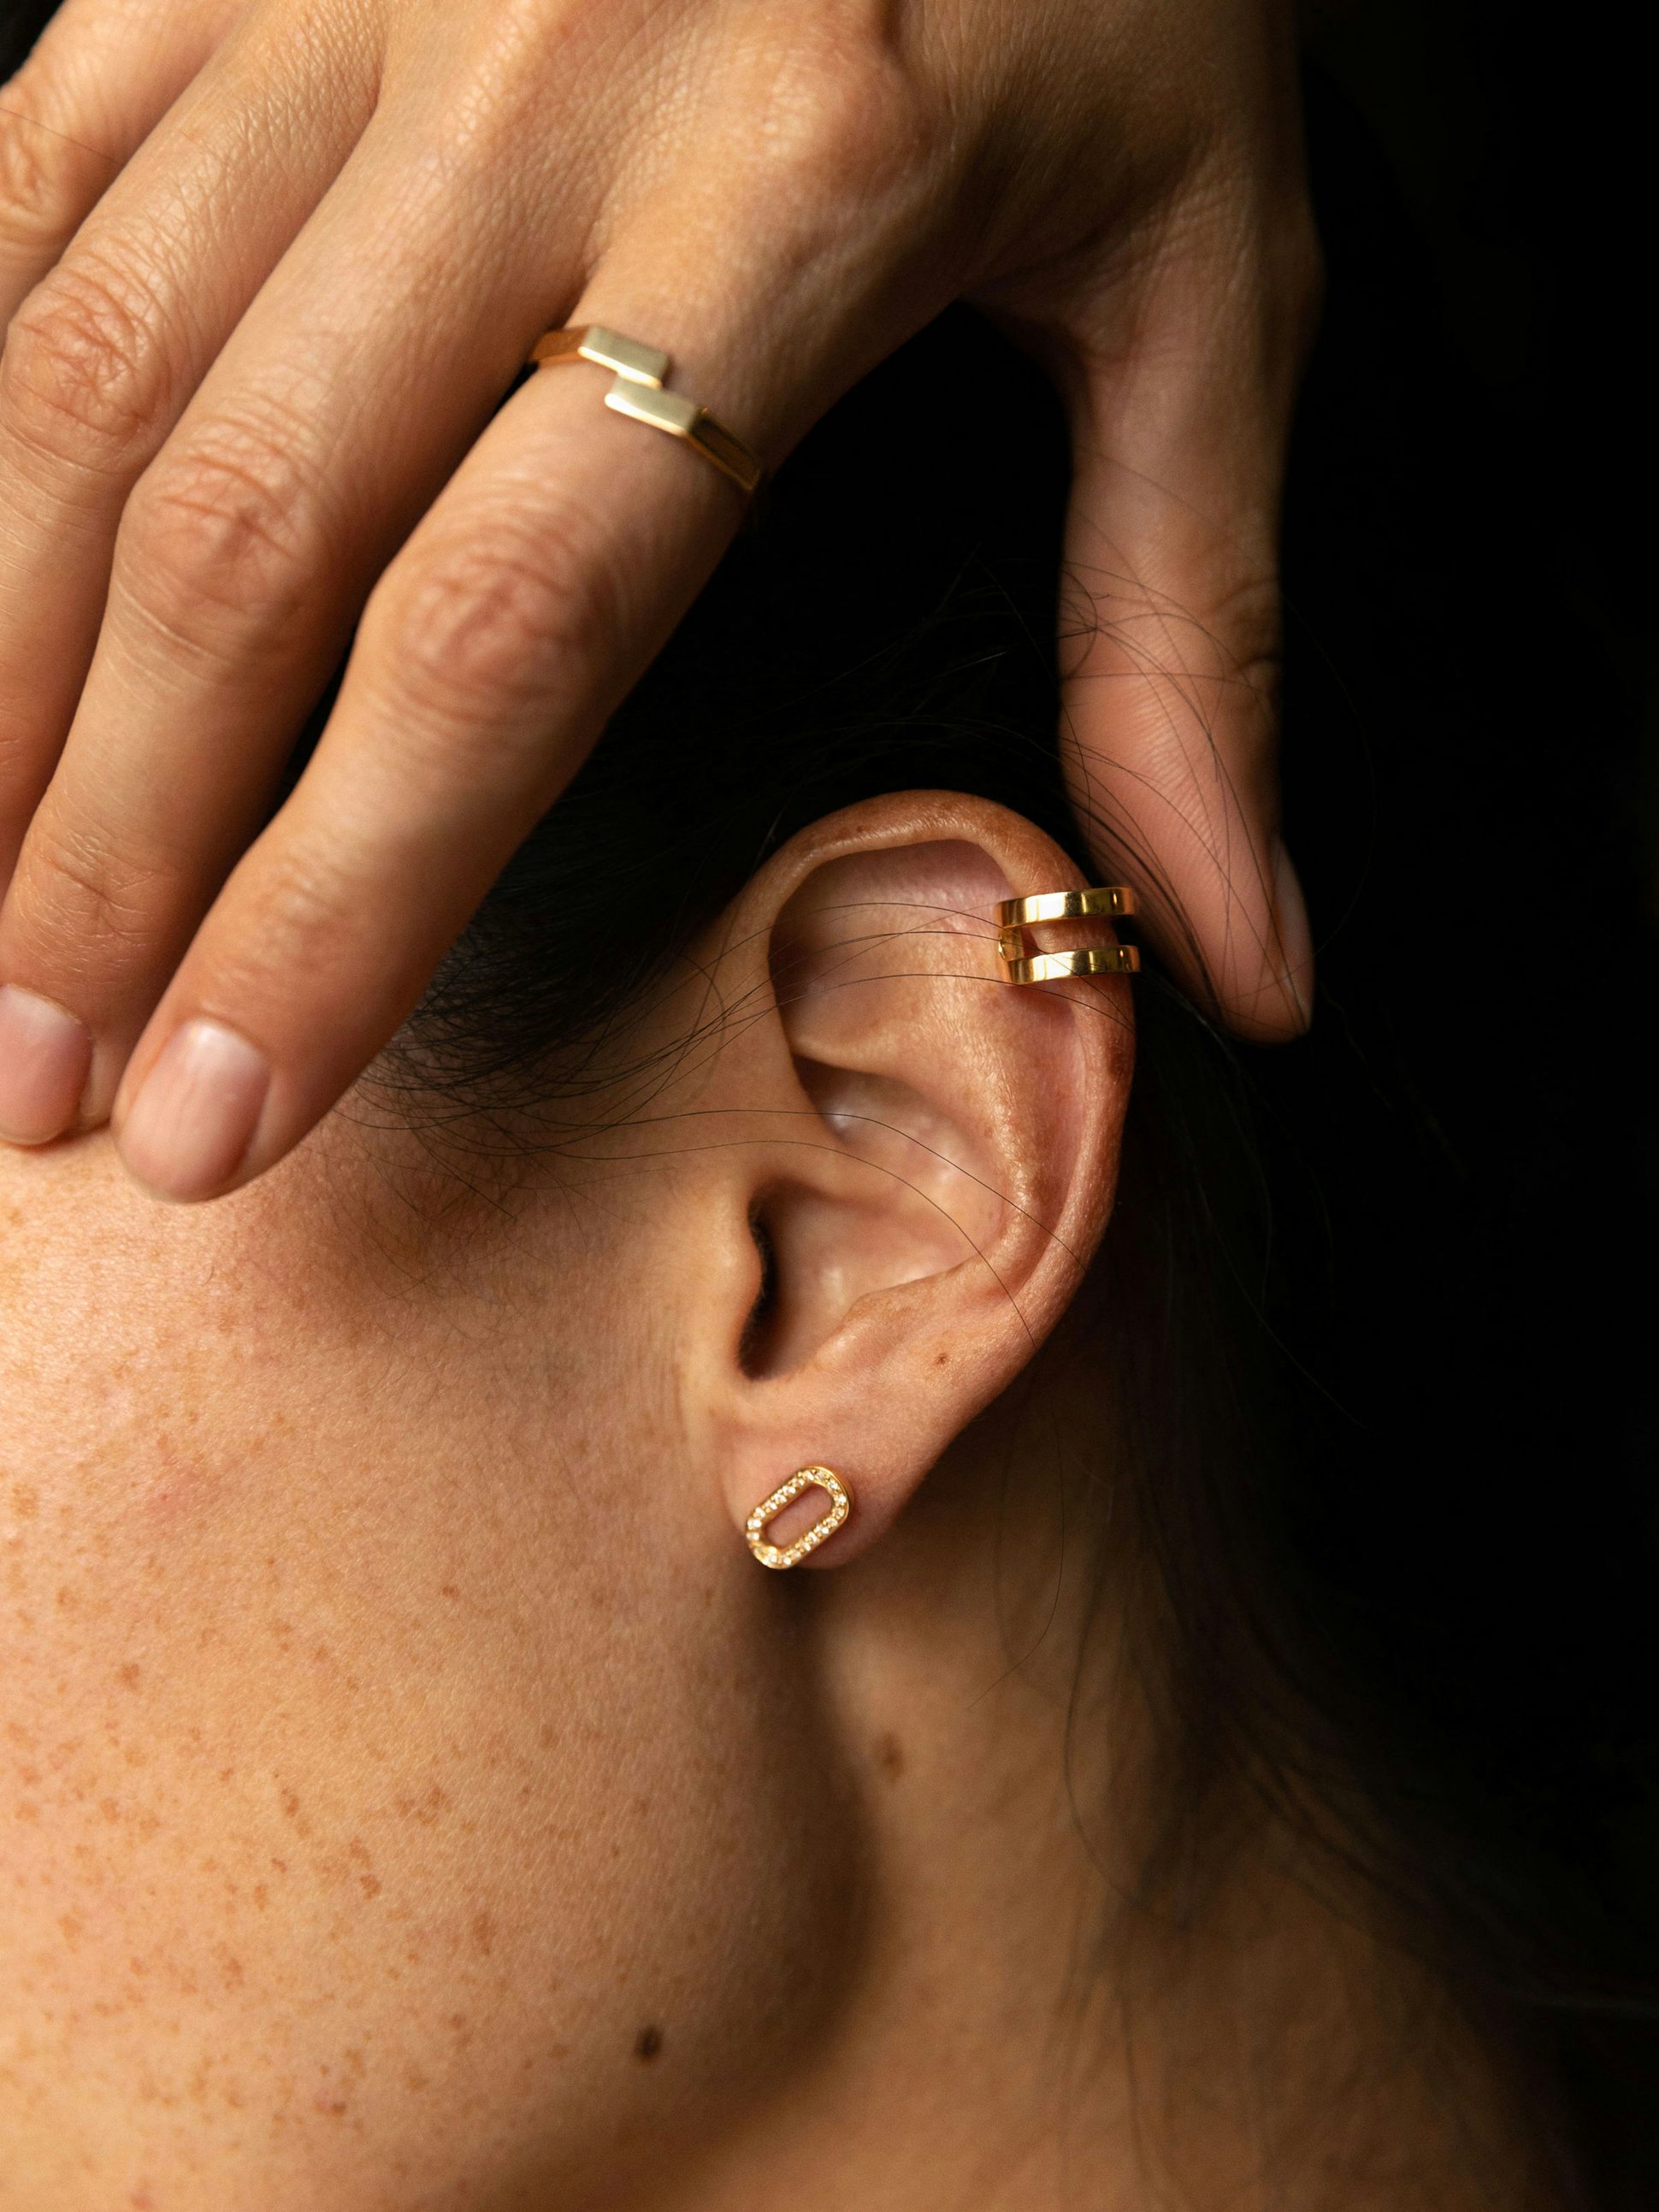 Étreintes ear clip paved in 18k Fairmined ethical yellow gold, paved with lab-grown diamonds, the unity. 